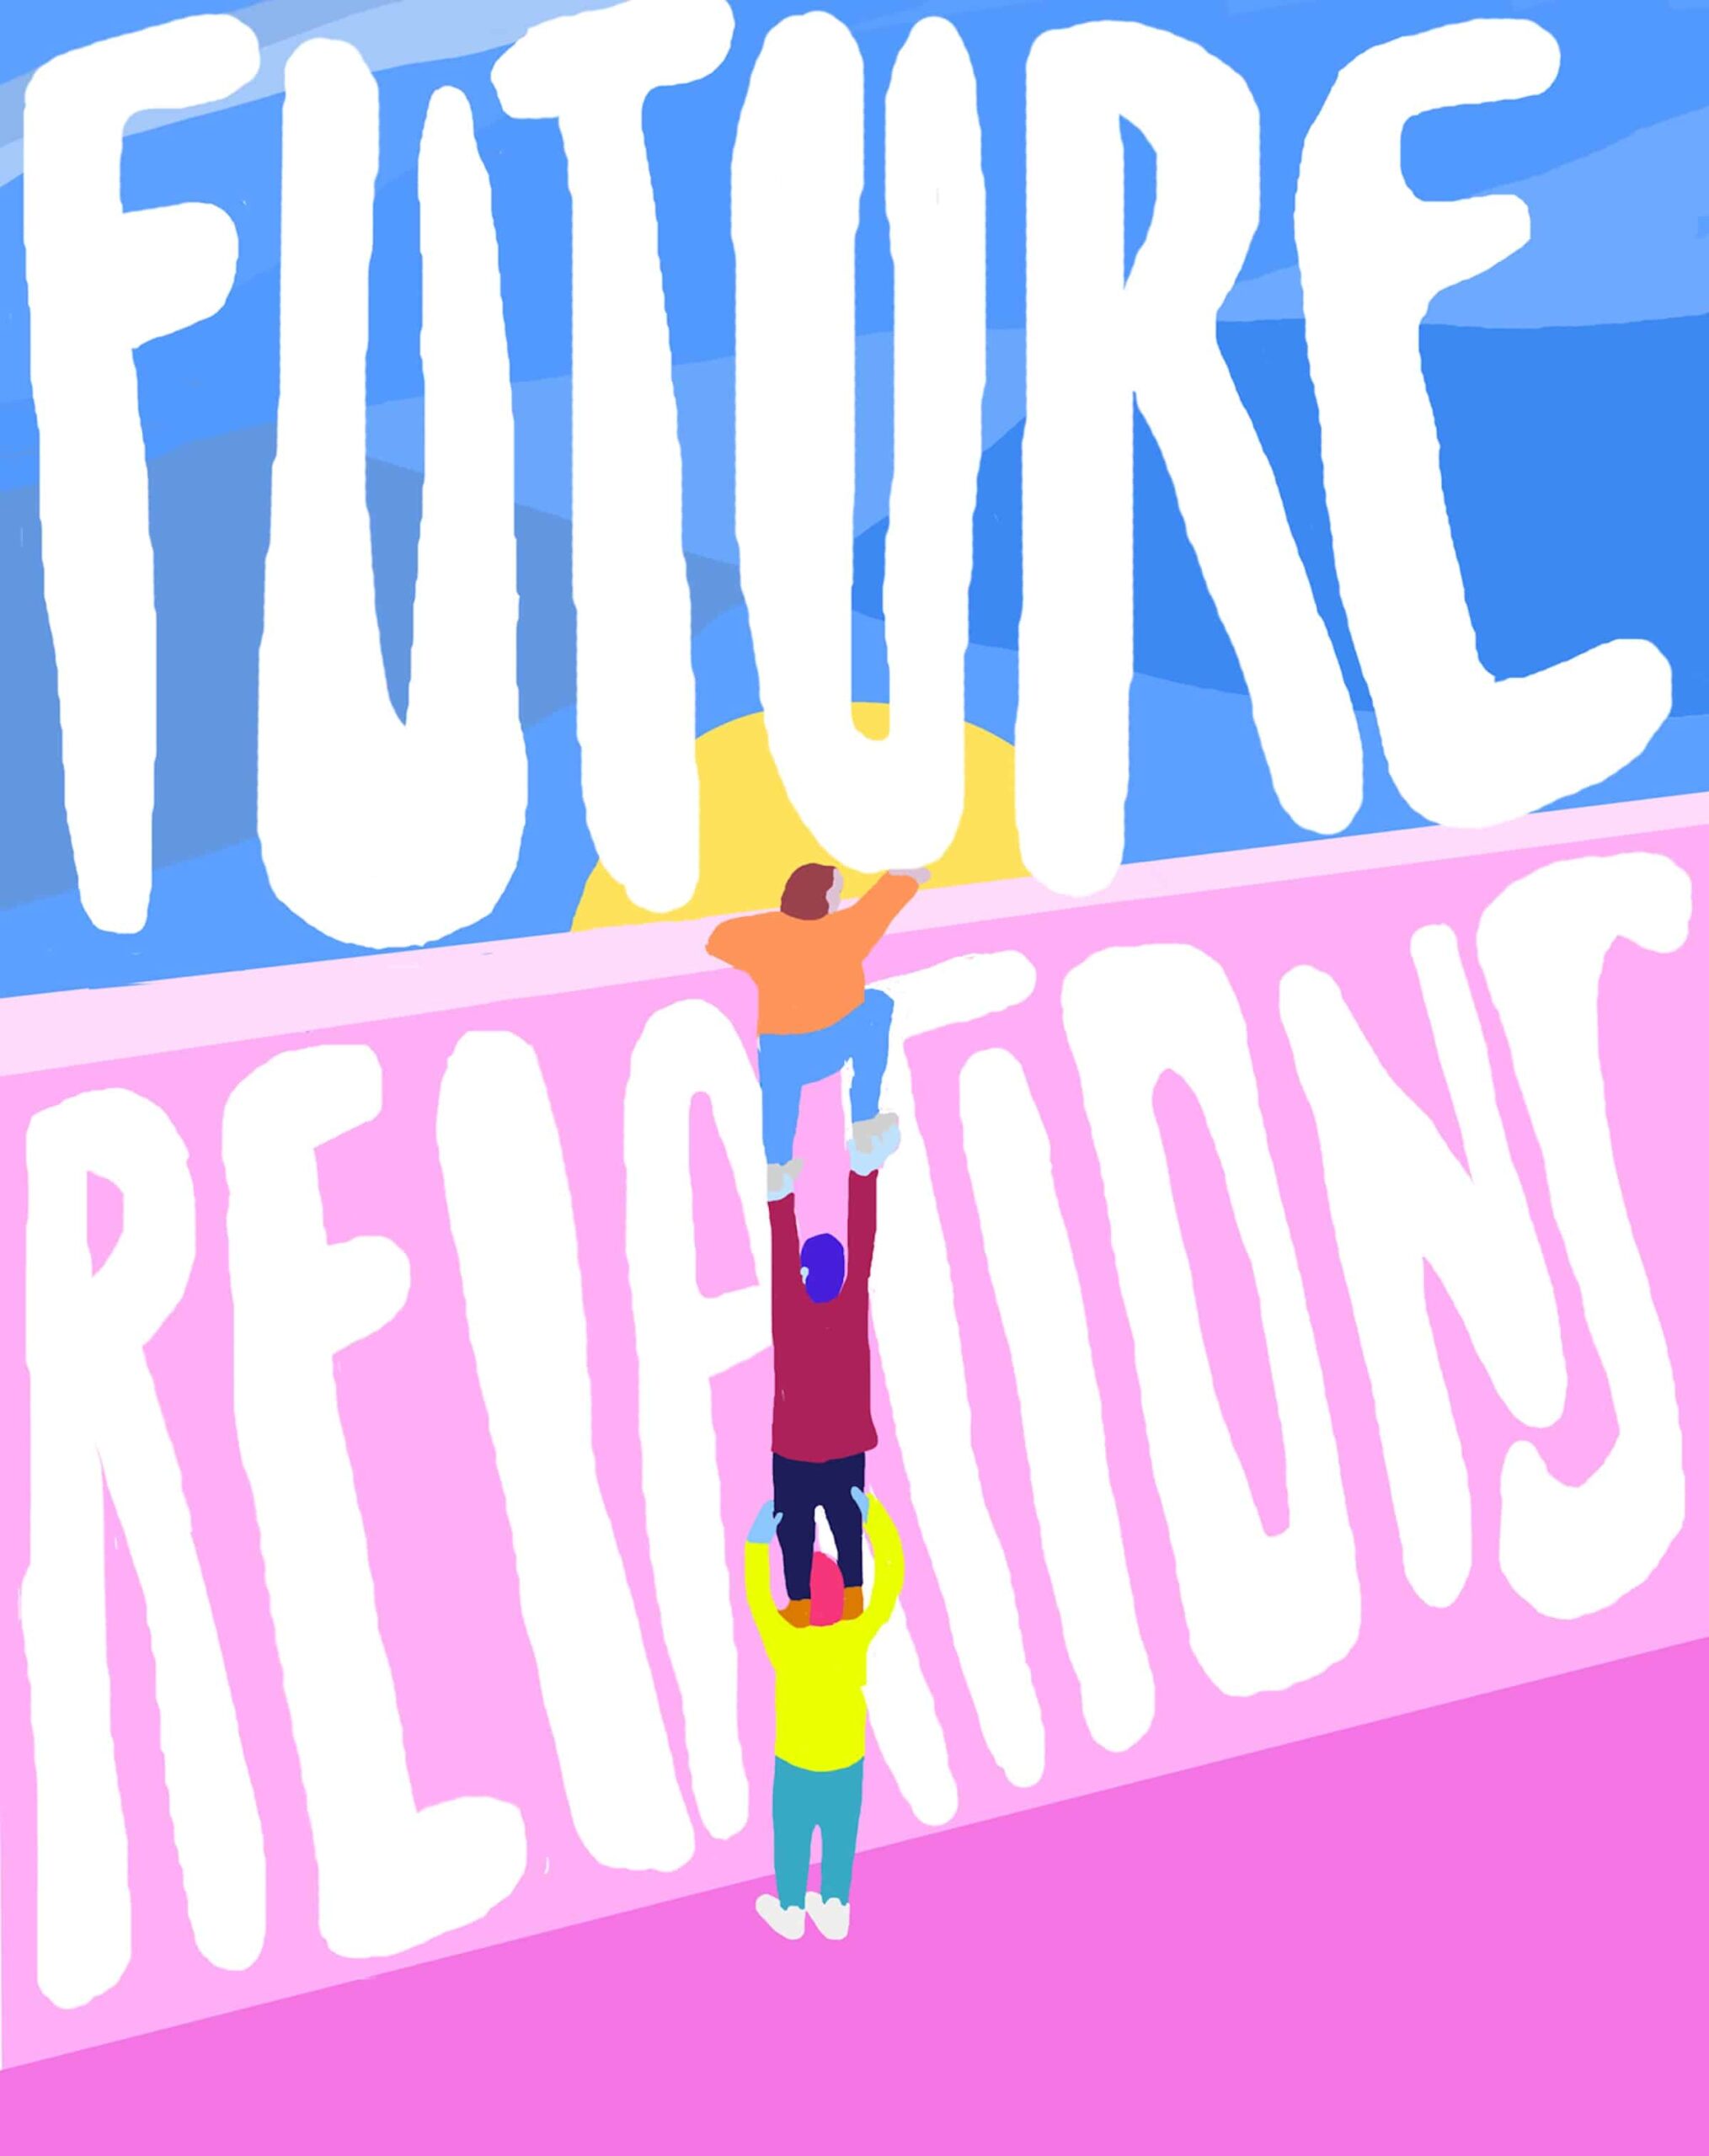 Future Relations: A Resource for Radical Teaching presents F.T.P.